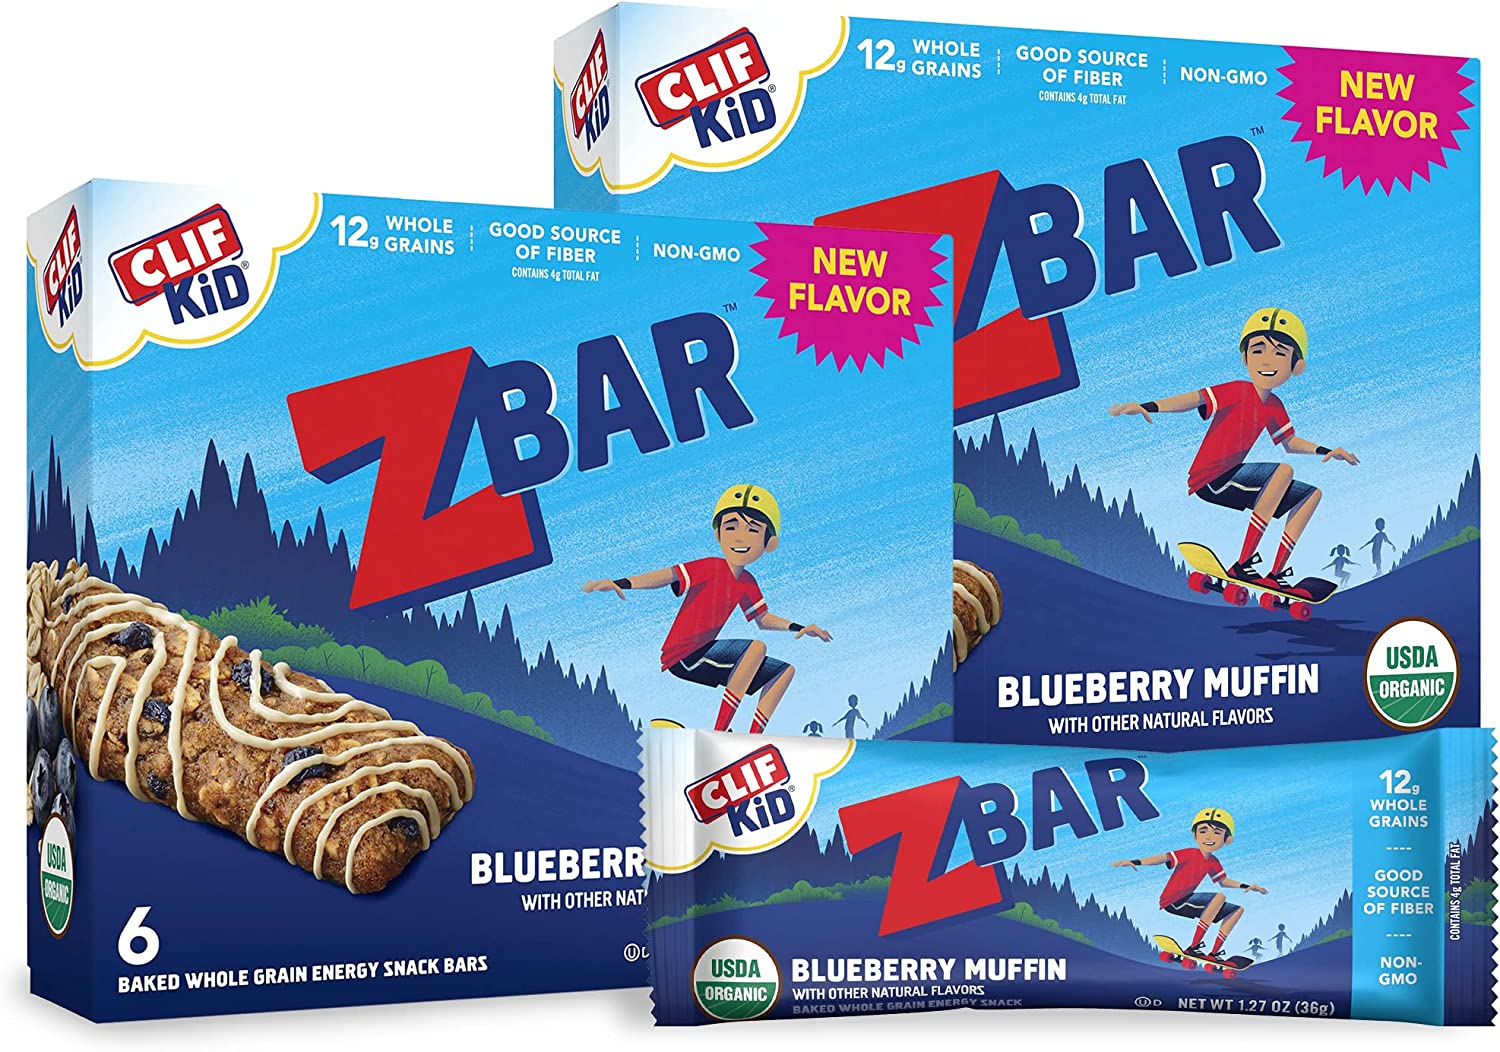 CLIF KID- Blueberry Muffin ZBar, Whole Grain Food Bar, Great Snack for Kids, Made with USDA Organic Ingredients, Good Source of Fiber, Chewy Texture, Fresh-Baked Flavor, Non-GMO (6 Count, 2-Pack)